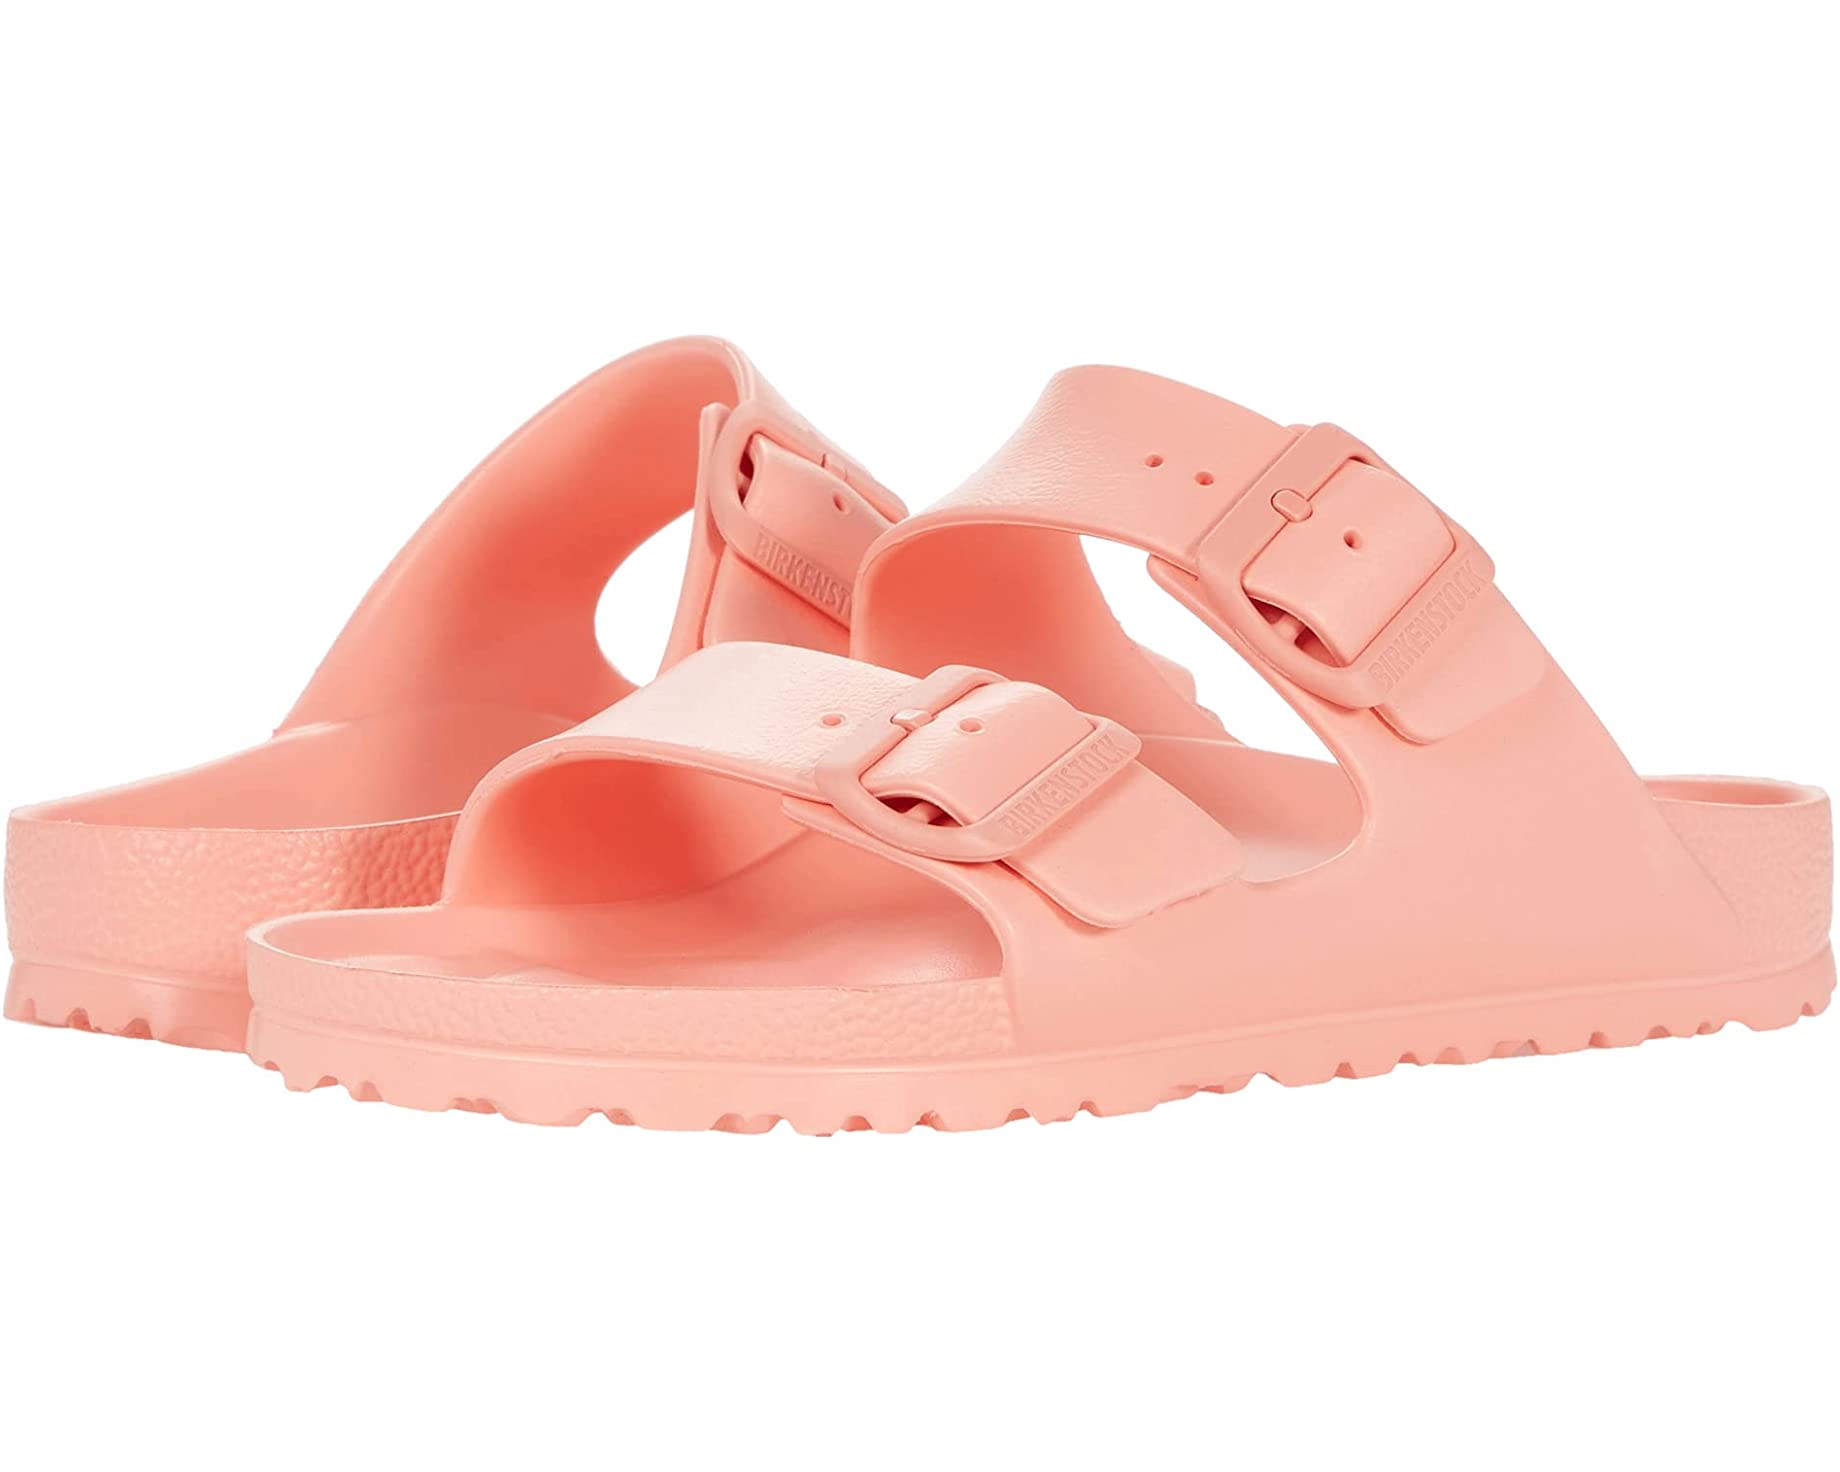 We're Making Birkenstock Sandals Chic This Summer (Against All Odds)